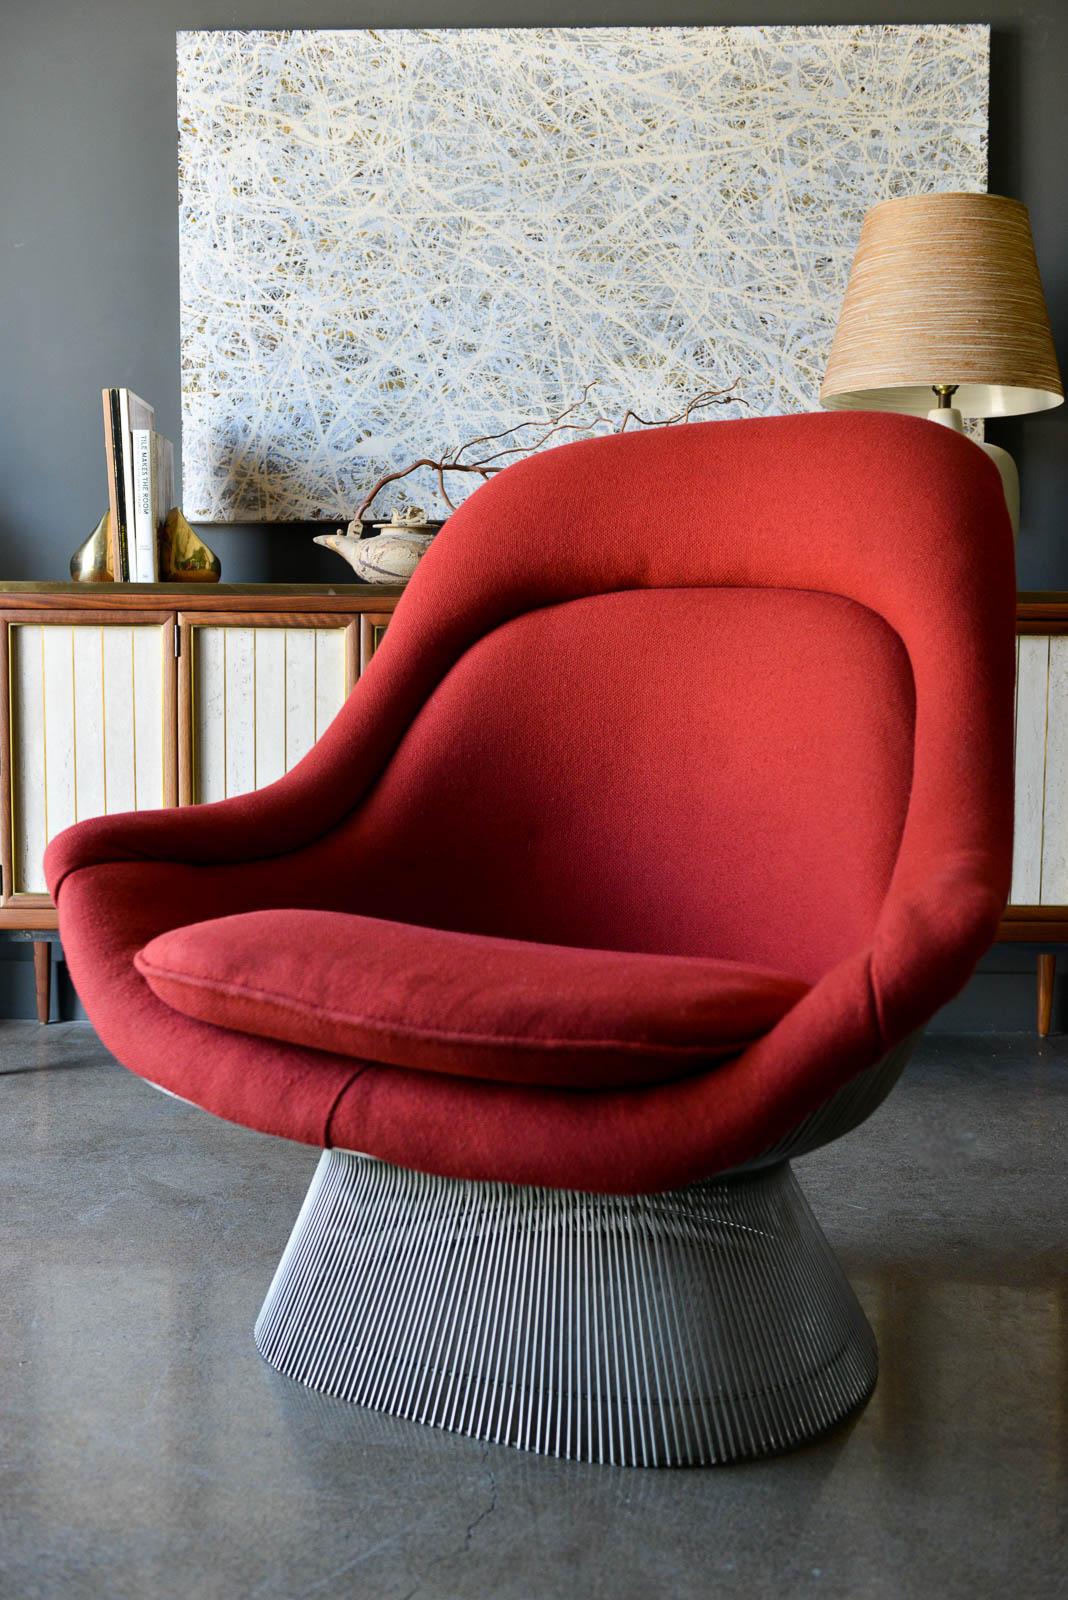 Warren Platner model 1705 'Easy Chair' for Knoll, circa 1970. Iconic and desirable vintage Warren Platner easy chair for Knoll in red wool fabric. Chair is in good vintage condition with slight wear to frame and fabric. No stains and very good for